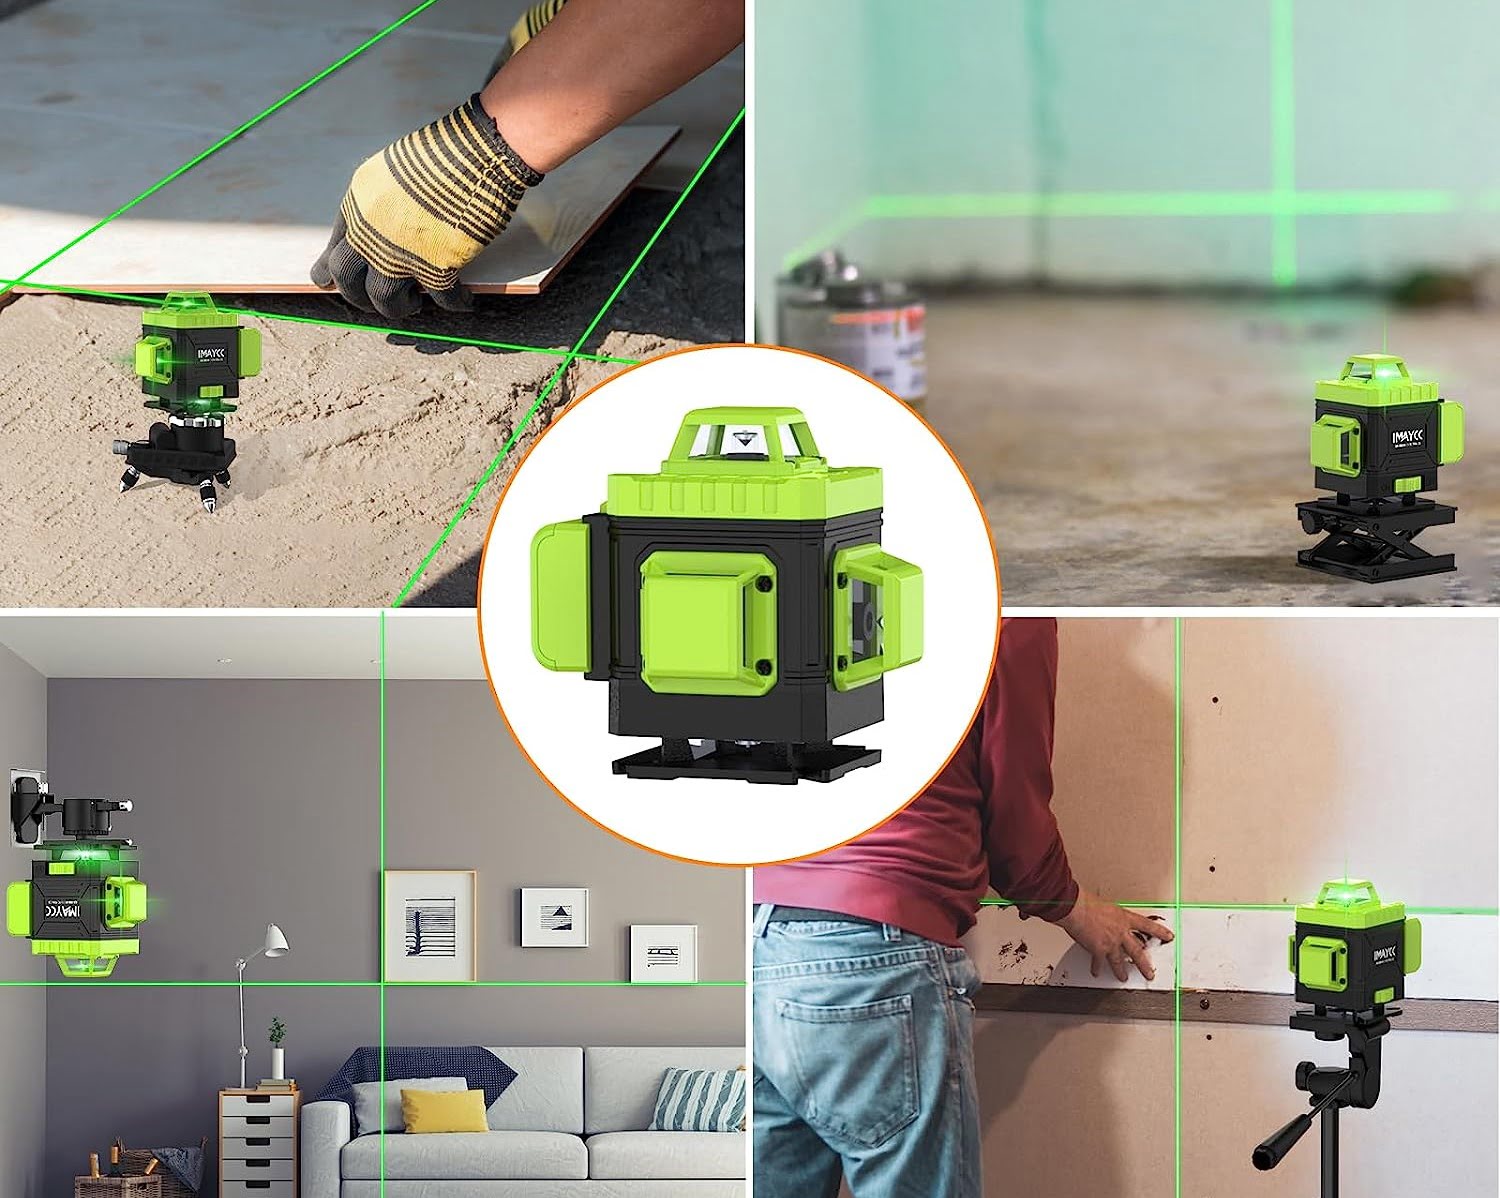 How To Project Square Vertical Lines With Self-Leveling Laser Level